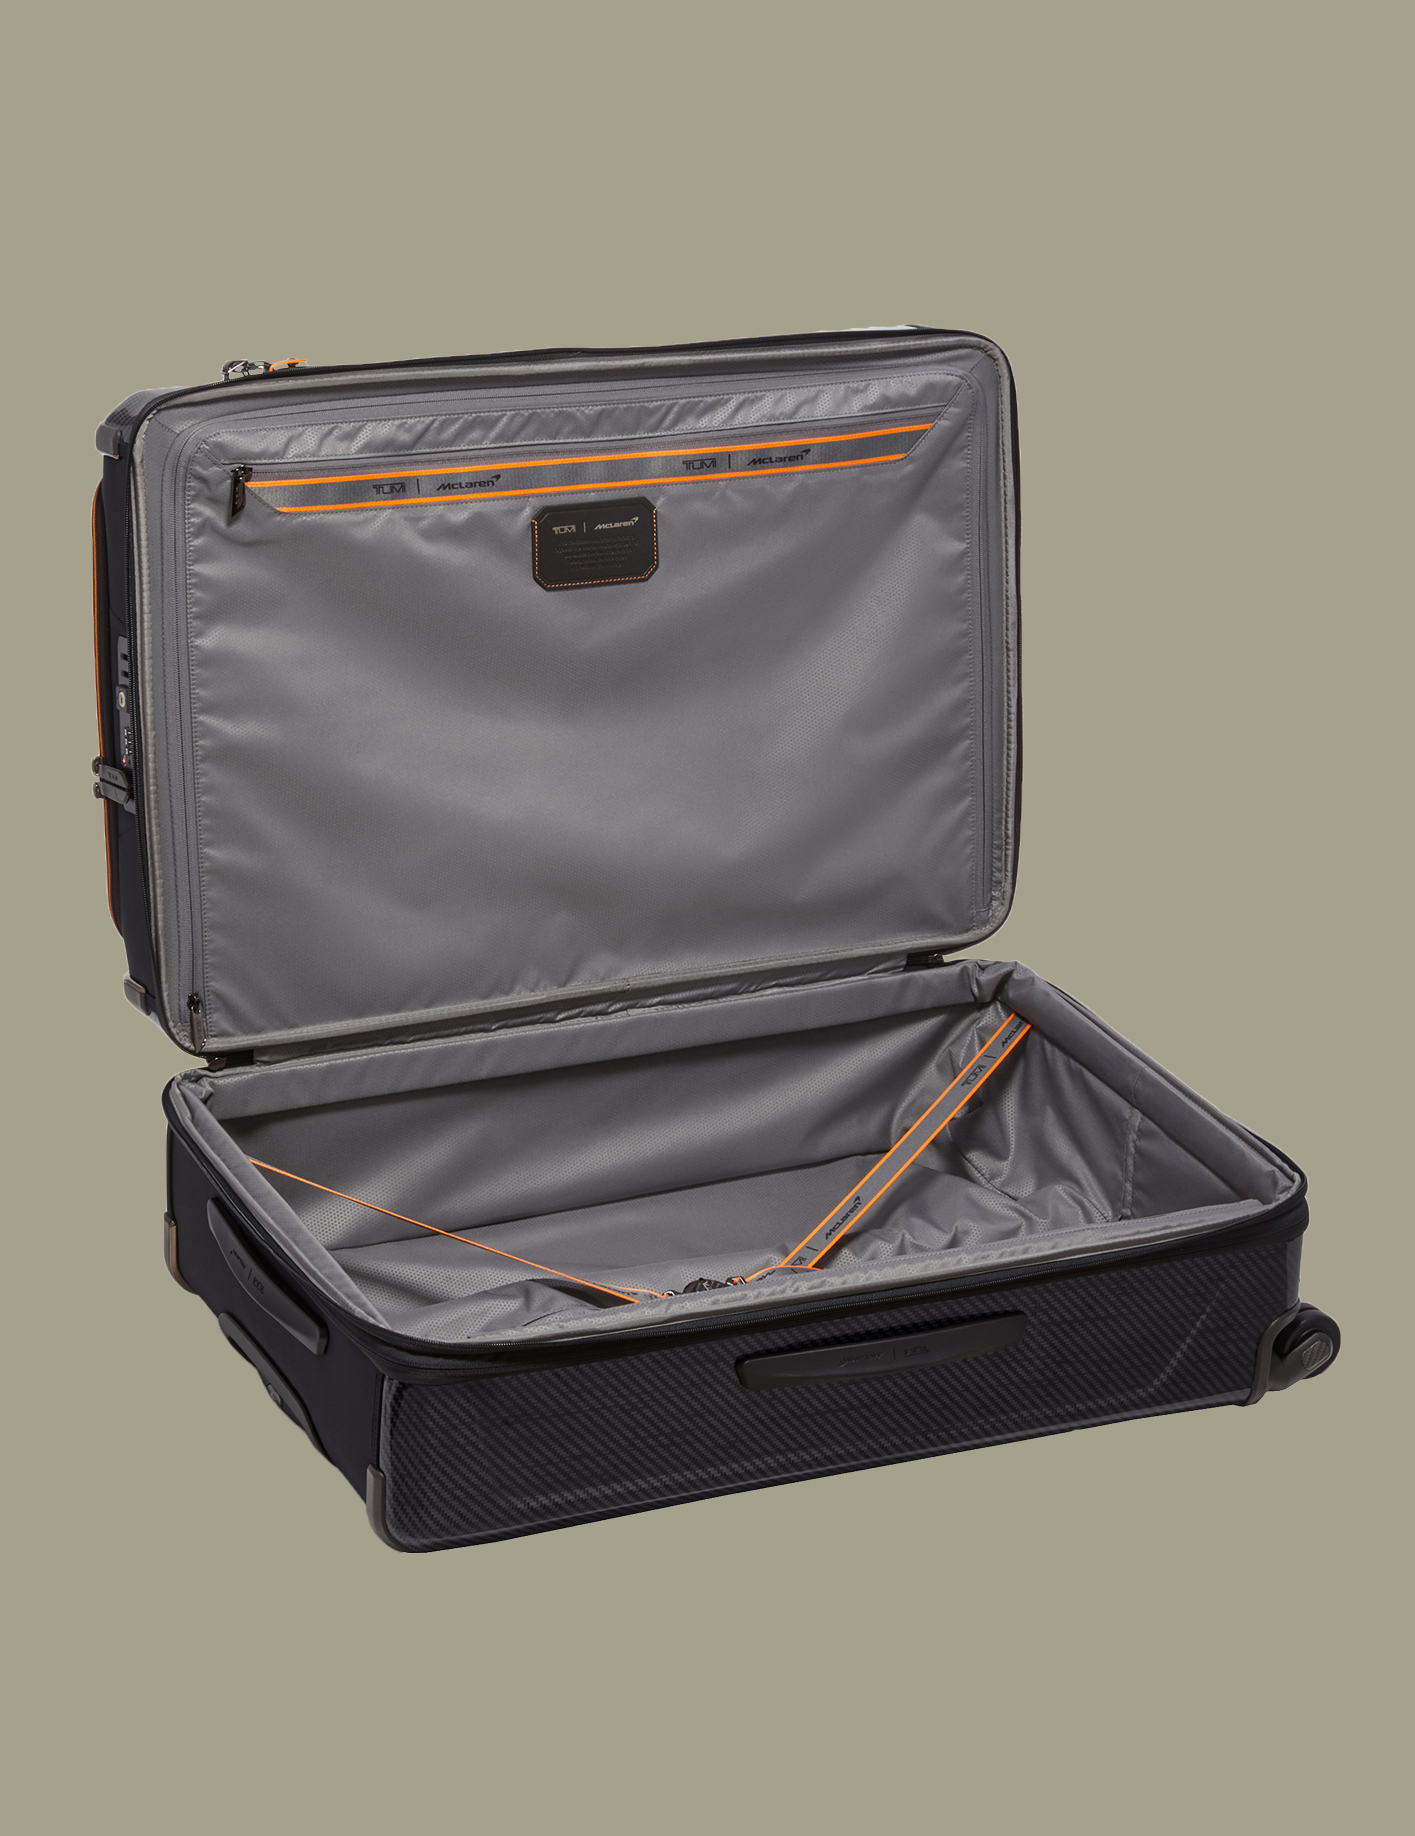 The luggage boasts tones of black and grey with papaya highlights